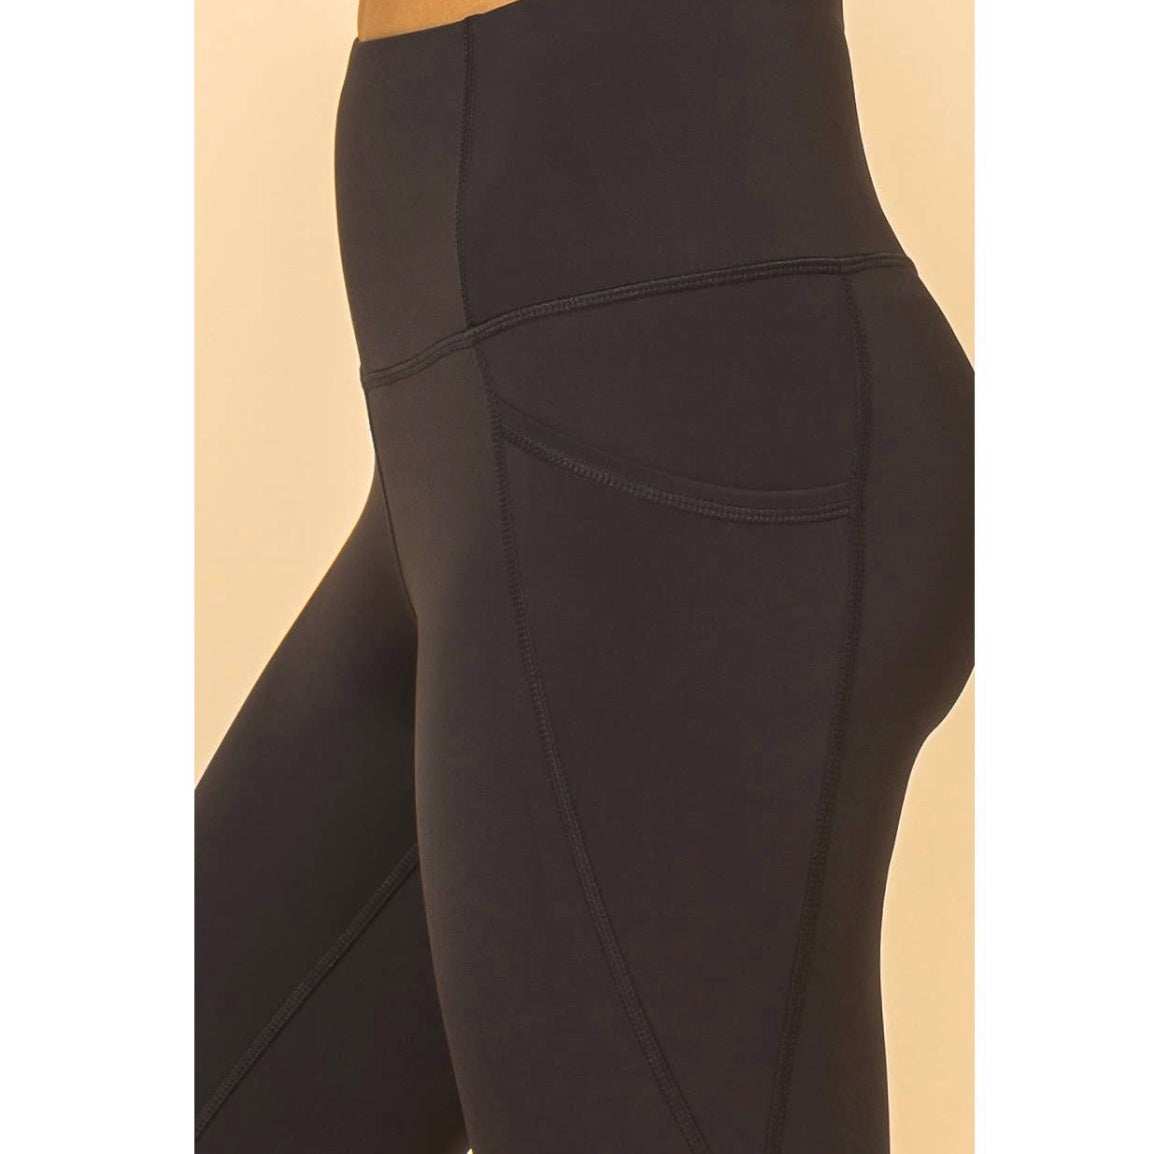 (Multiple Colors) OUT N ABOUT HIGH WAIST LEGGINGS